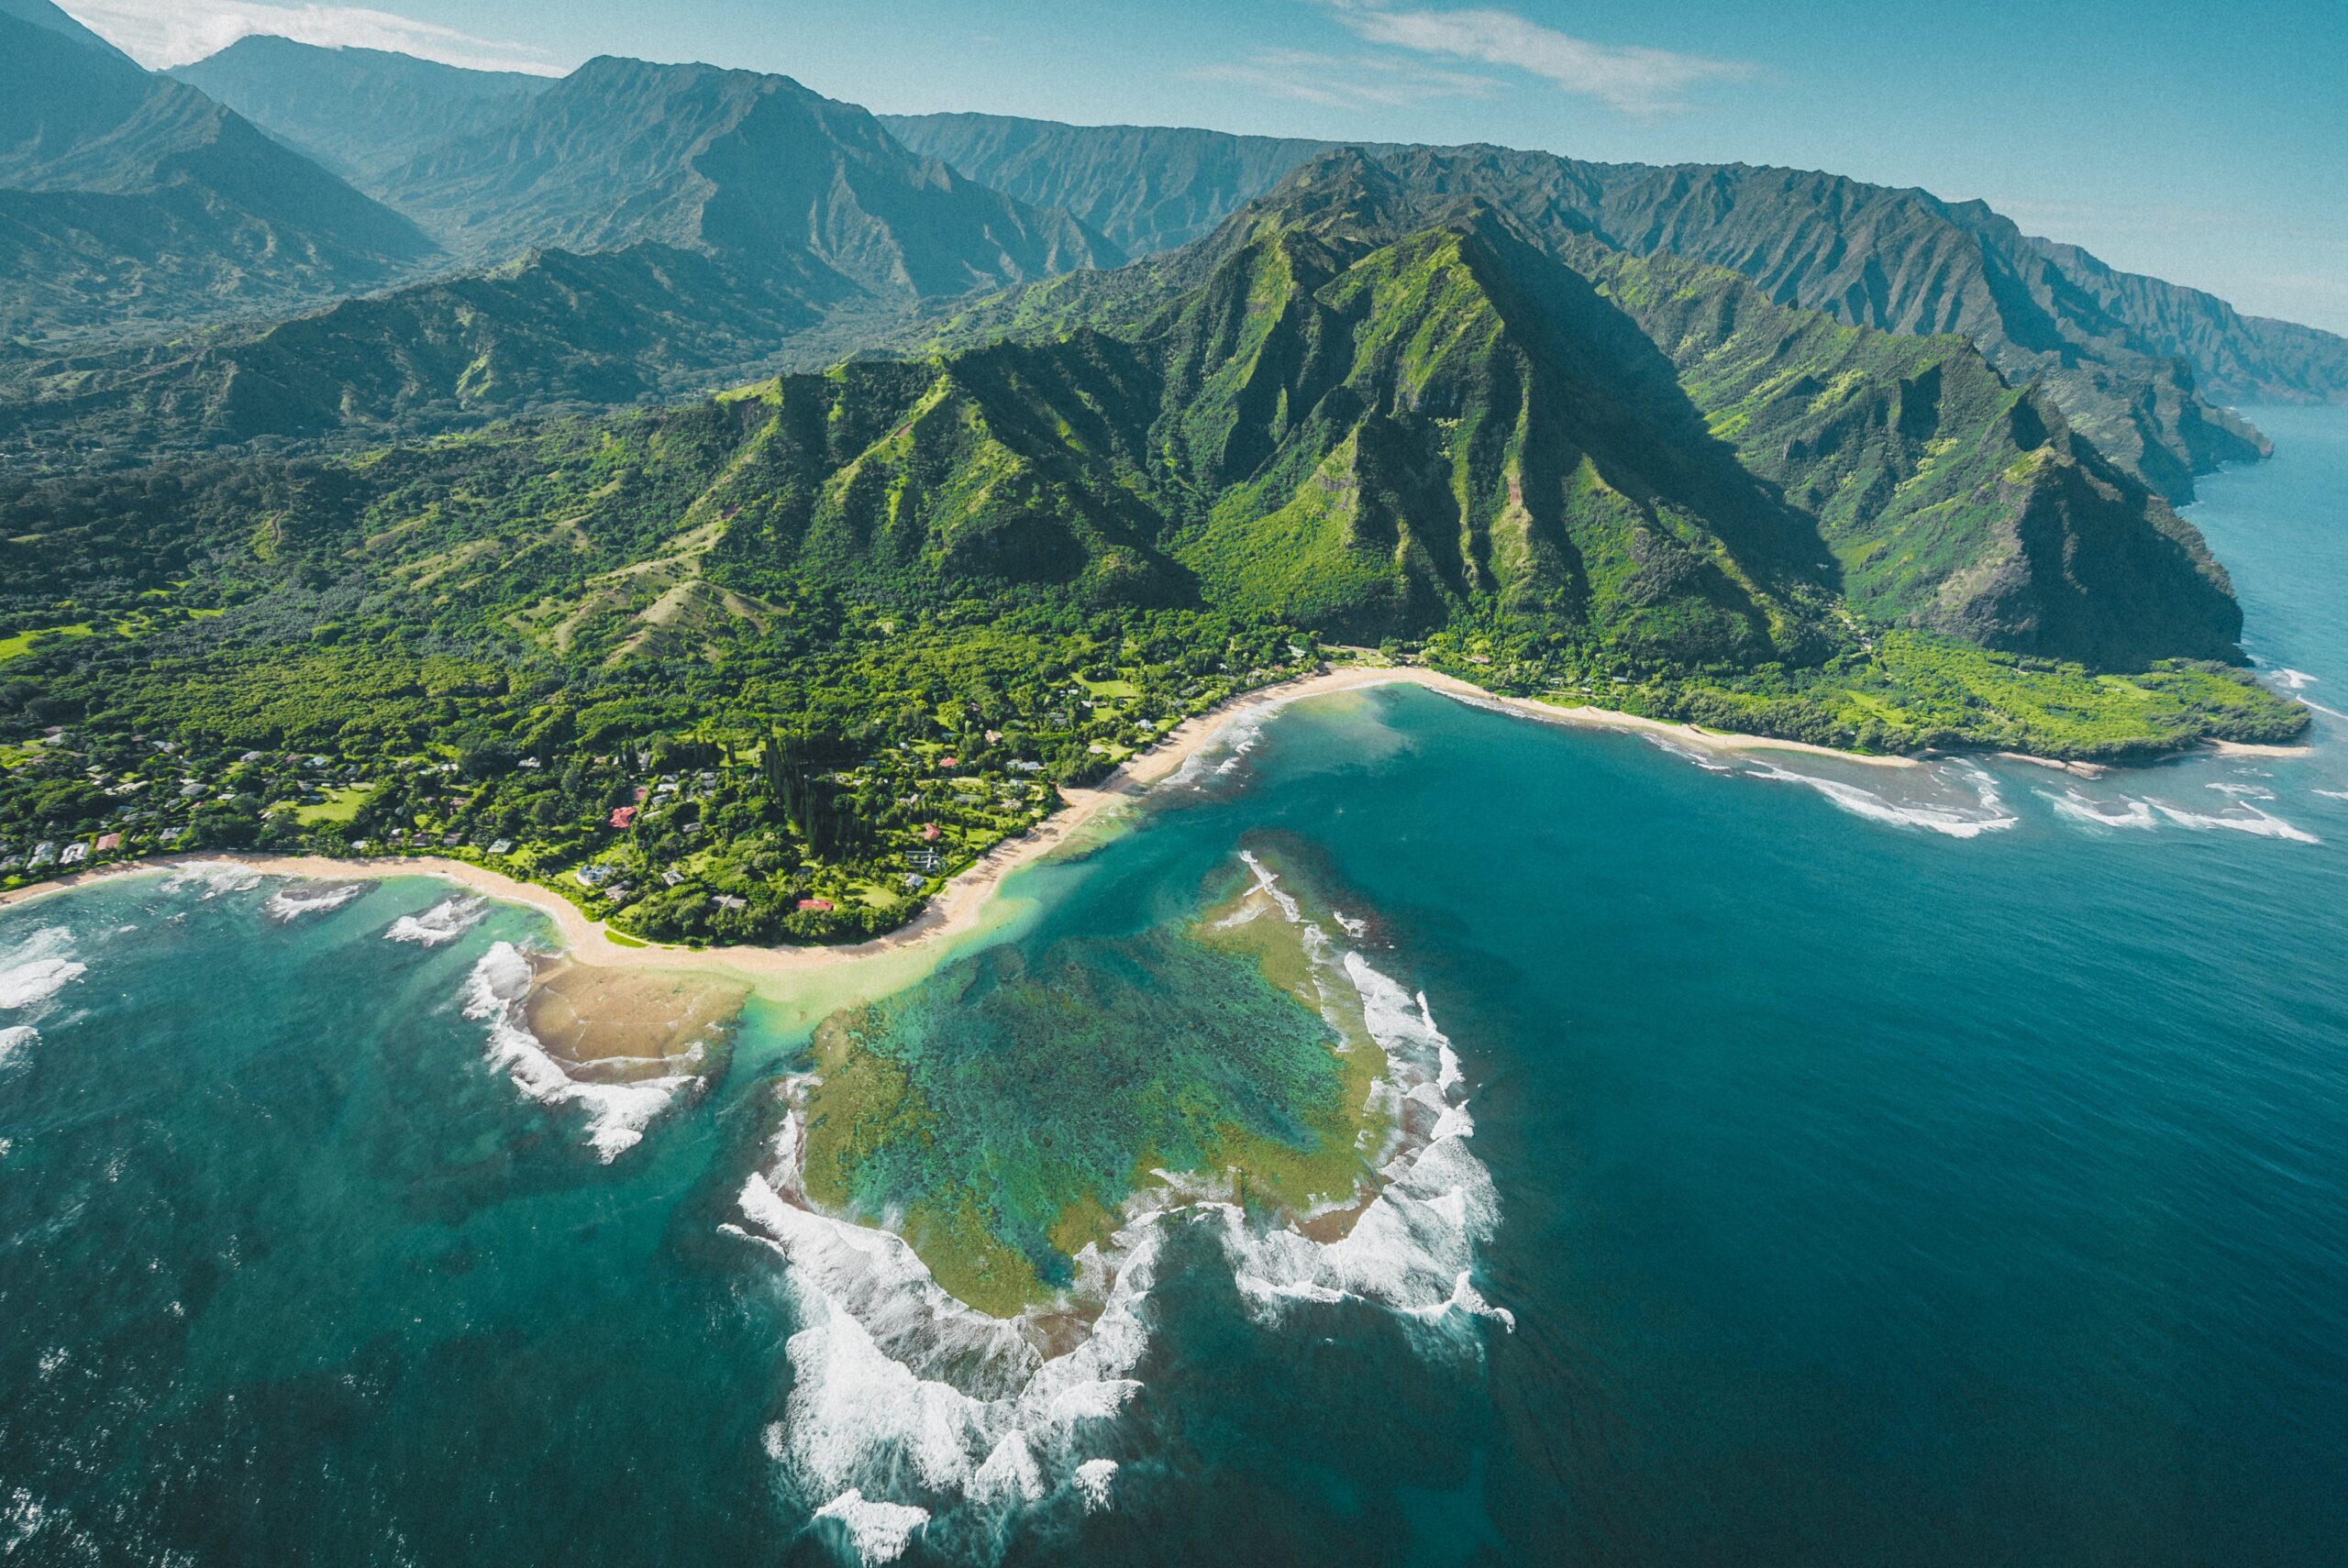 There are many secluded islands in Hawaii that visitors will enjoy. 
Pictured: a rural Hawaiian island with blue waters and green lush mountains